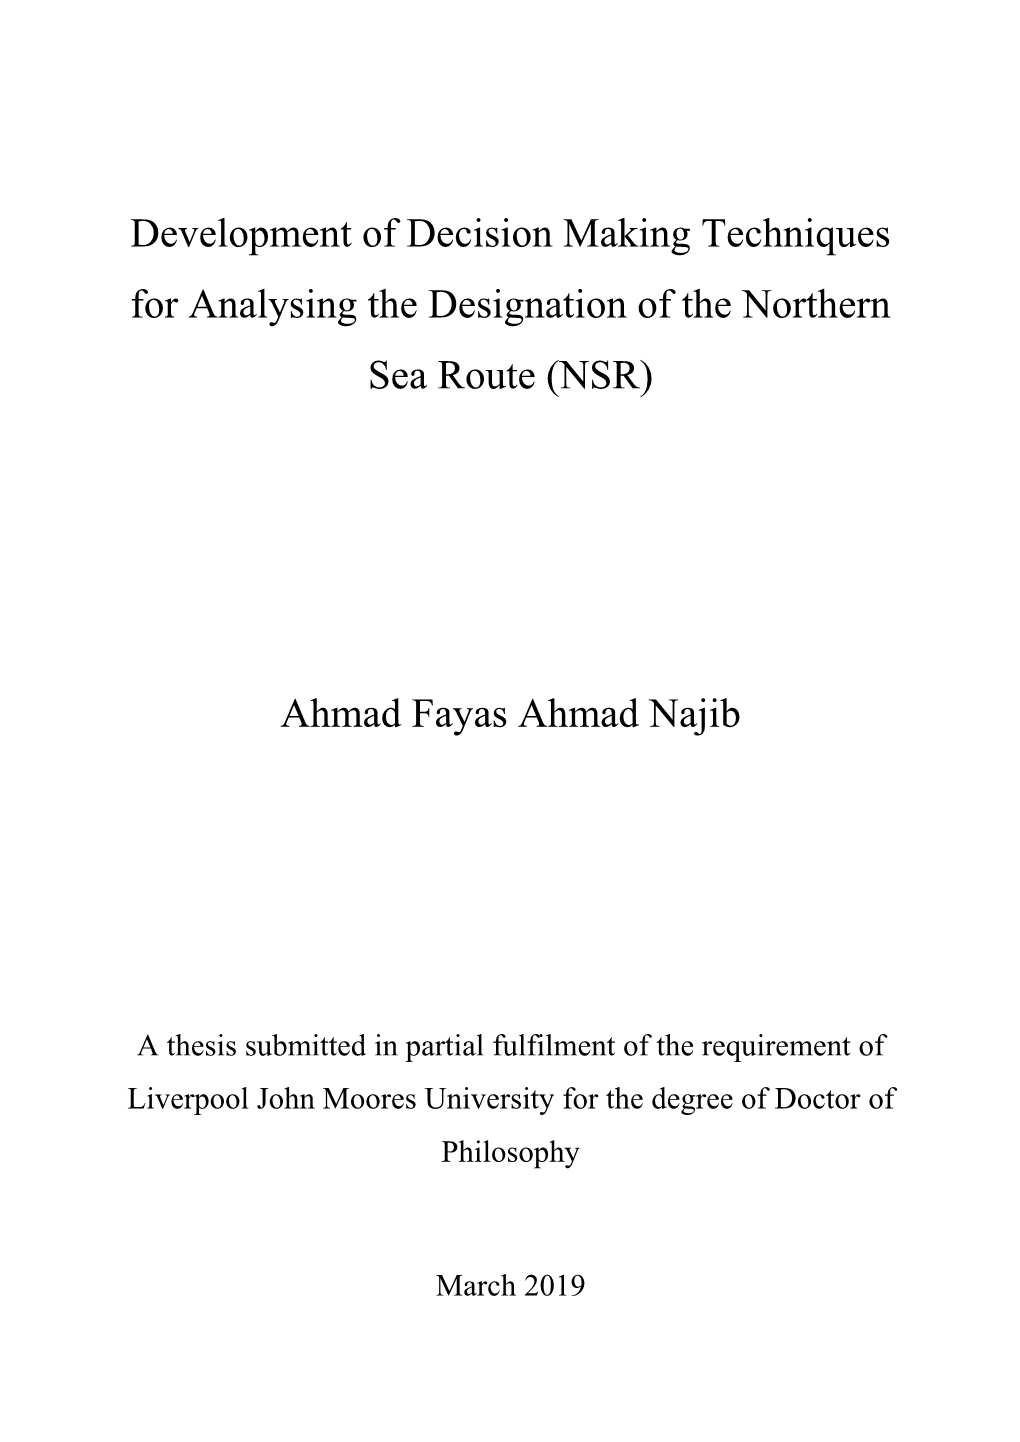 Development of Decision Making Techniques for Analysing the Designation of the Northern Sea Route (NSR) Ahmad Fayas Ahmad Najib